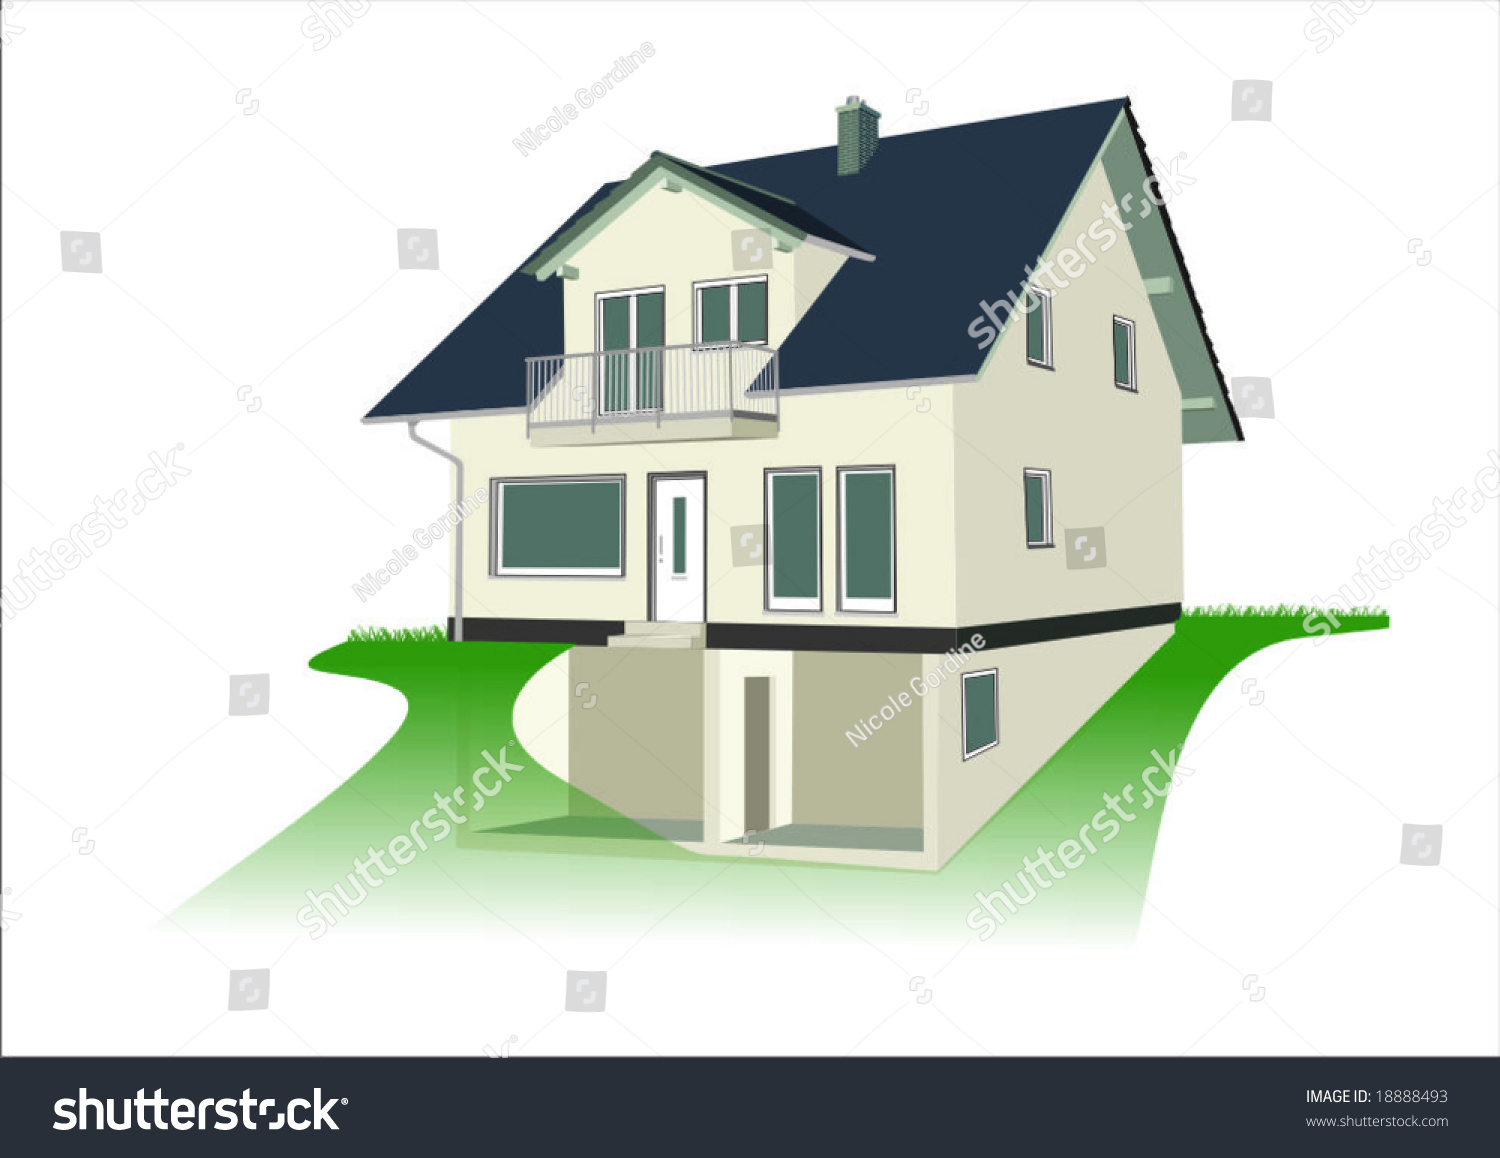 clipart house shutters - photo #48